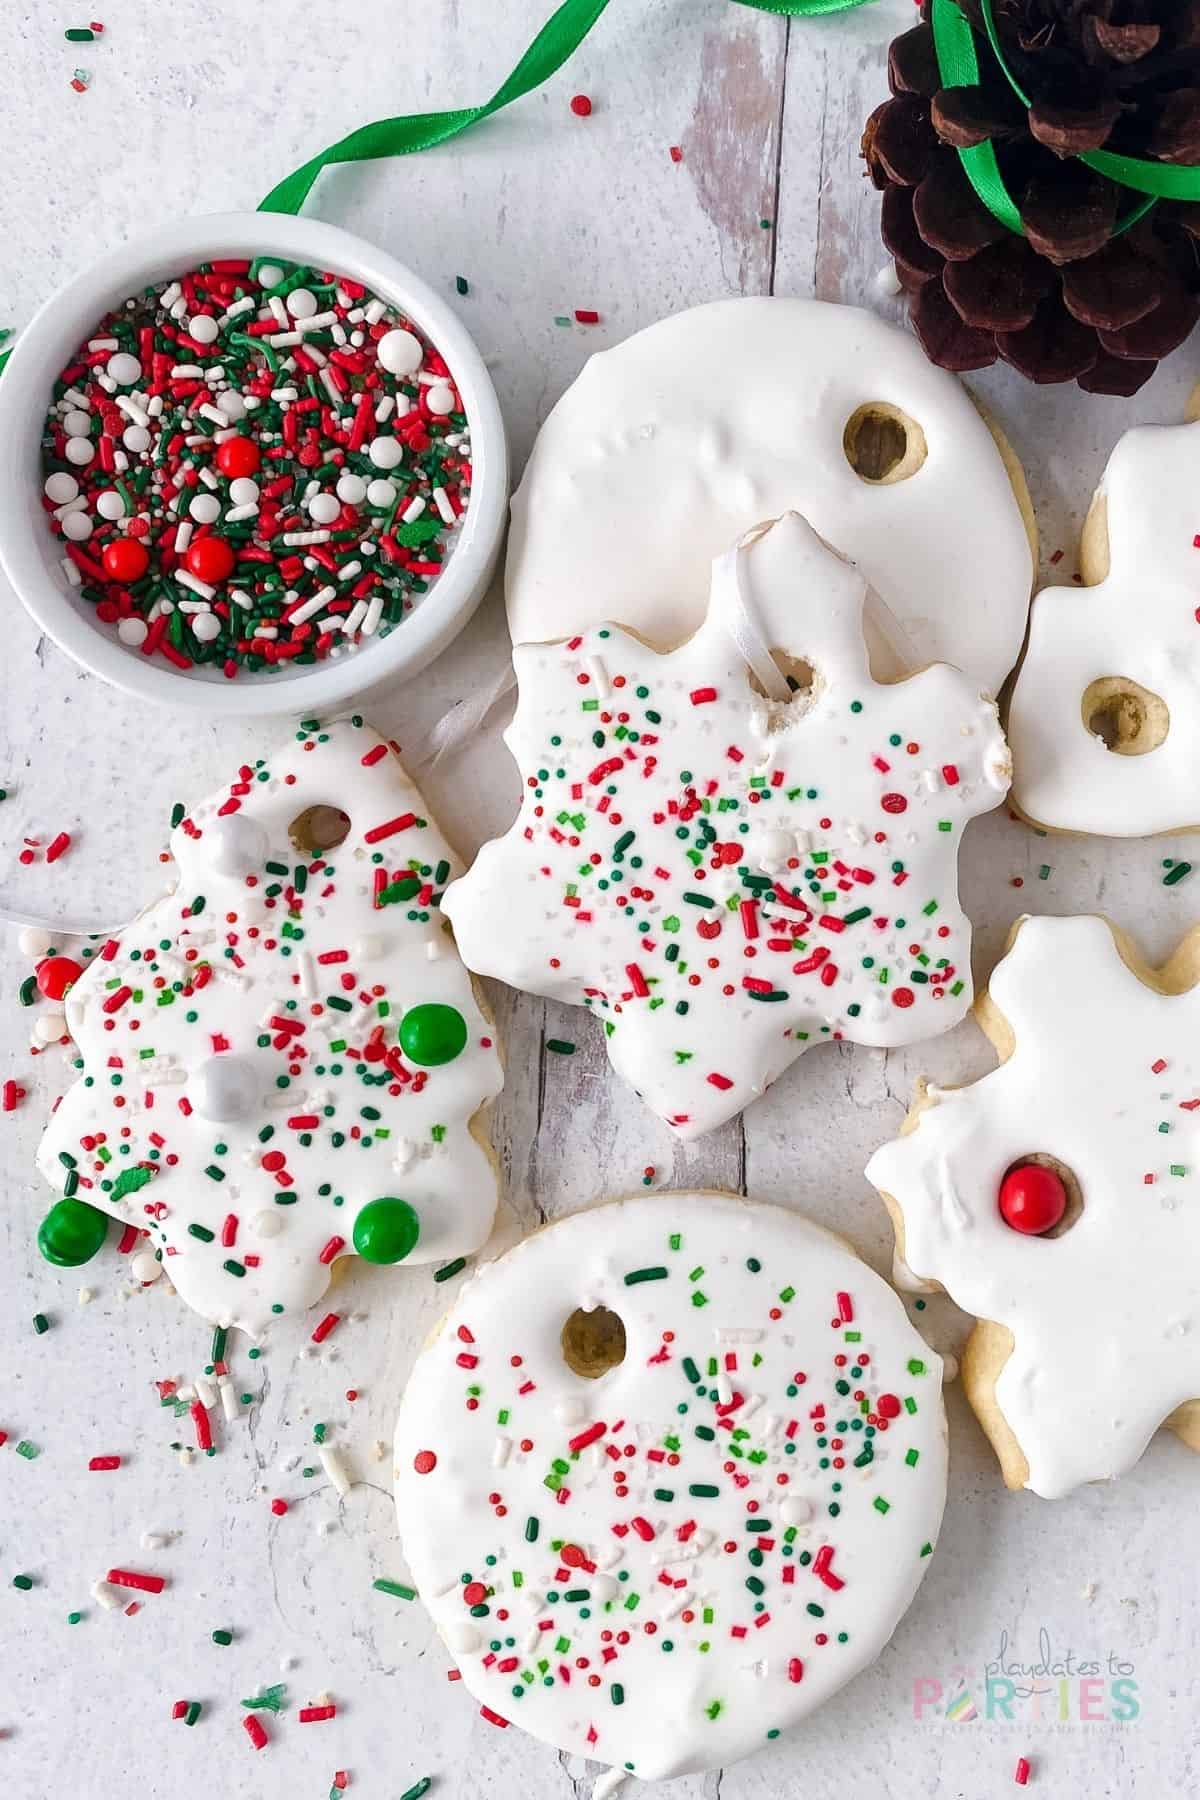 Sugar cookies decorated with white icing and holiday sprinkles on a white wood surface.